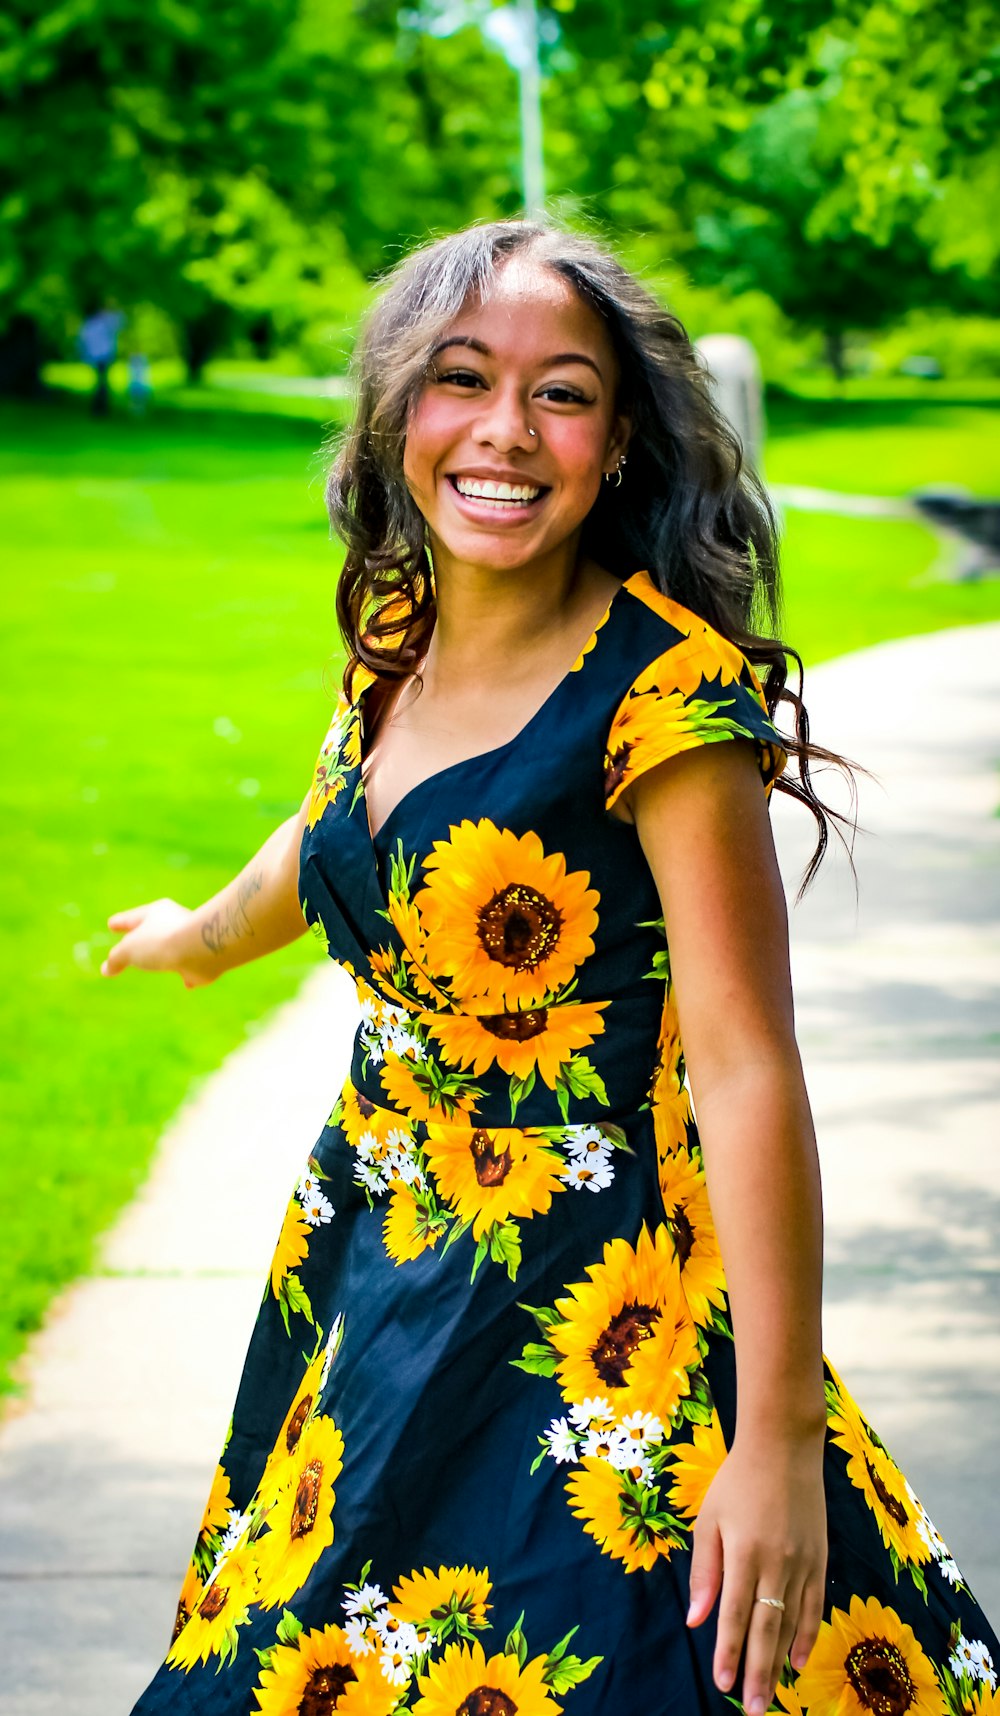 smiling woman in blue and yellow floral dress standing on pathway during daytime